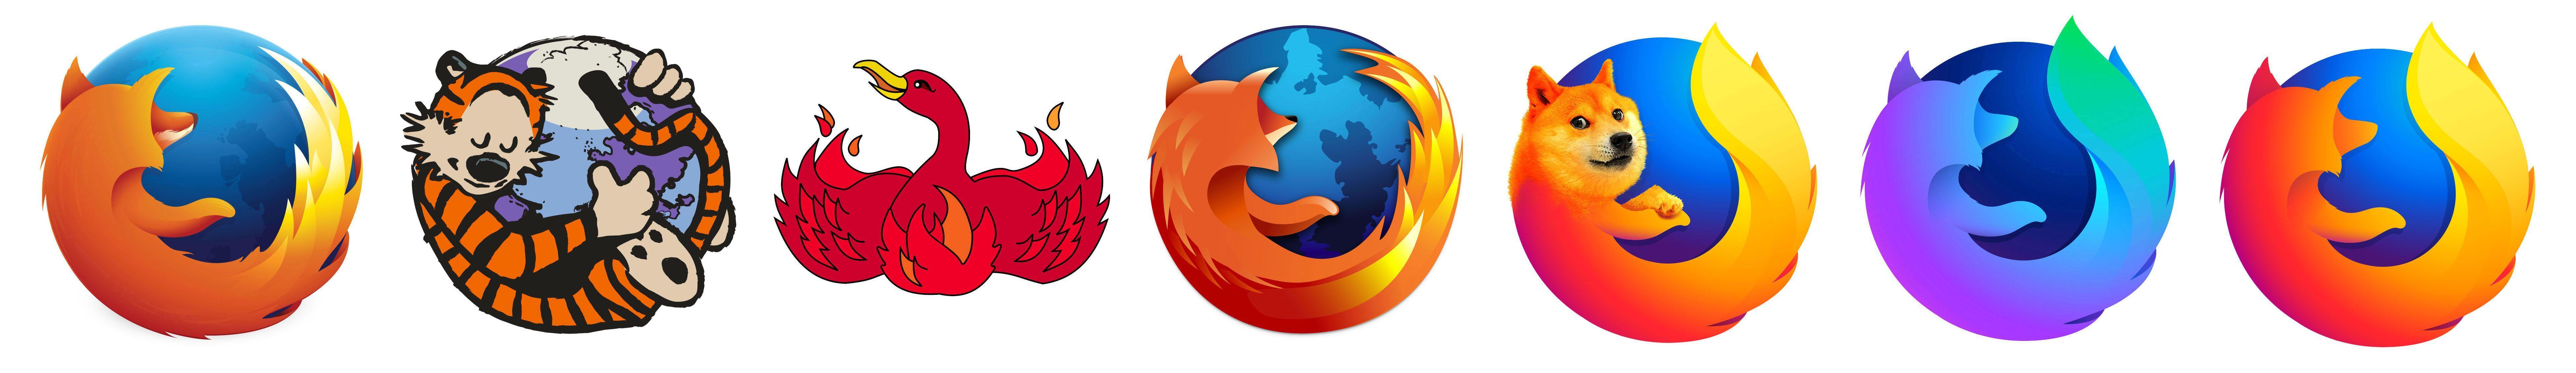 Firefox Quantum Logo - Mozilla's Firefox Quantum challenges Chrome in browser speed - CNET